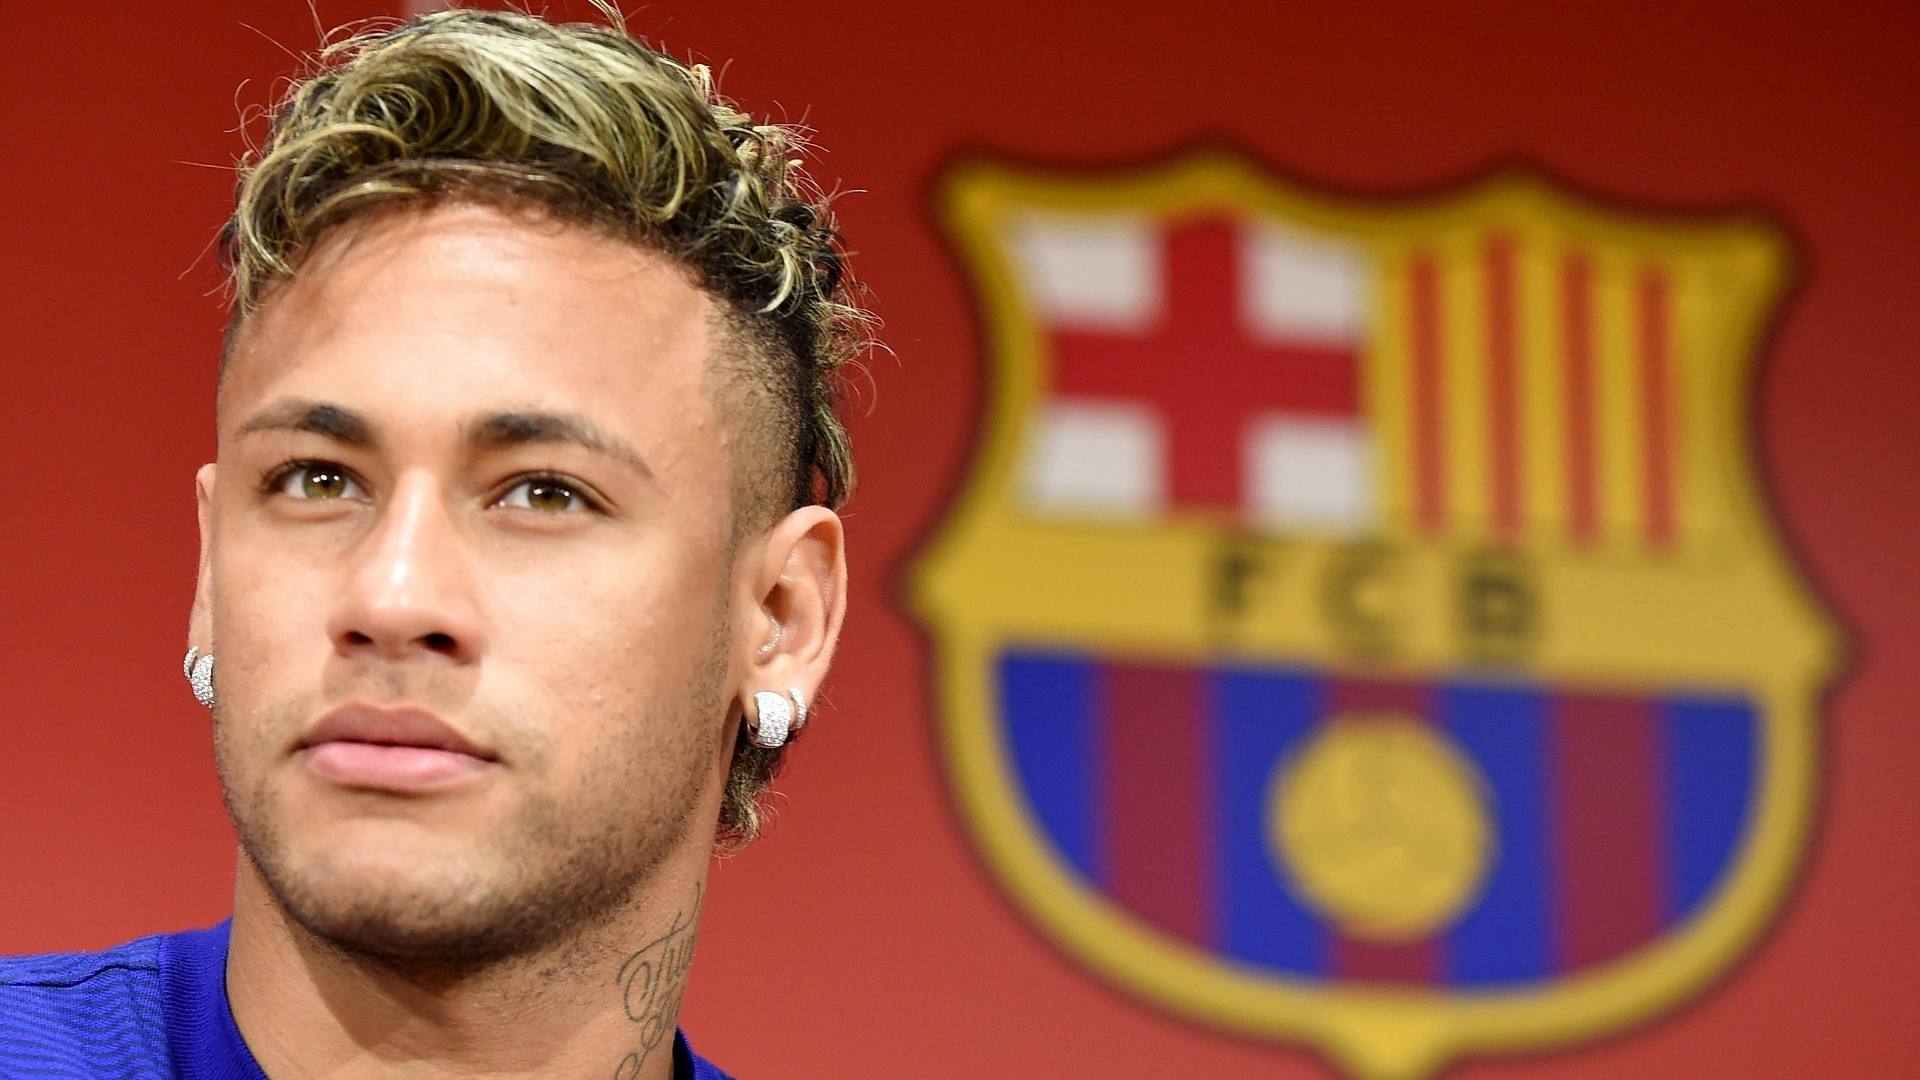 Neymar helped maintain Barcelona as one of the top clubs in Europe for the past four seasons as he blossomed into a worldwide star. [Photo: baidu.com]